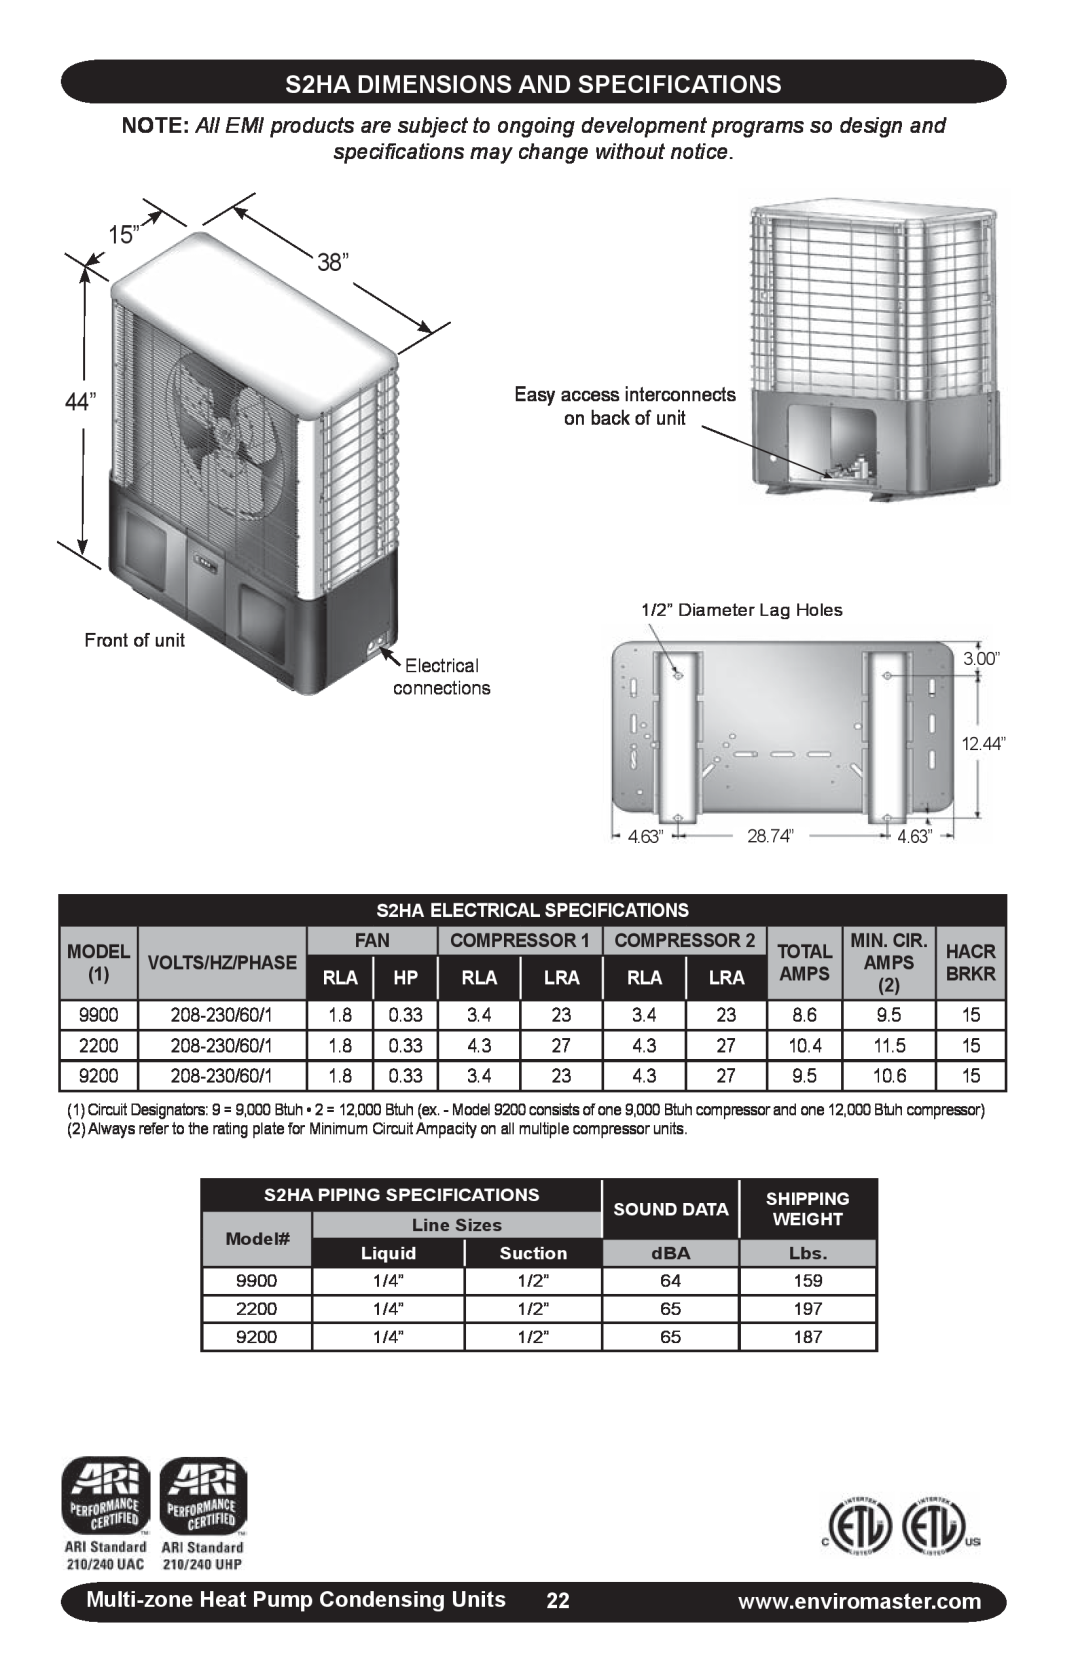 EMI T2HA manual S2HA DIMENSIONS AND SPECIFICATIONS, 15” 38”, speciﬁcations may change without notice 